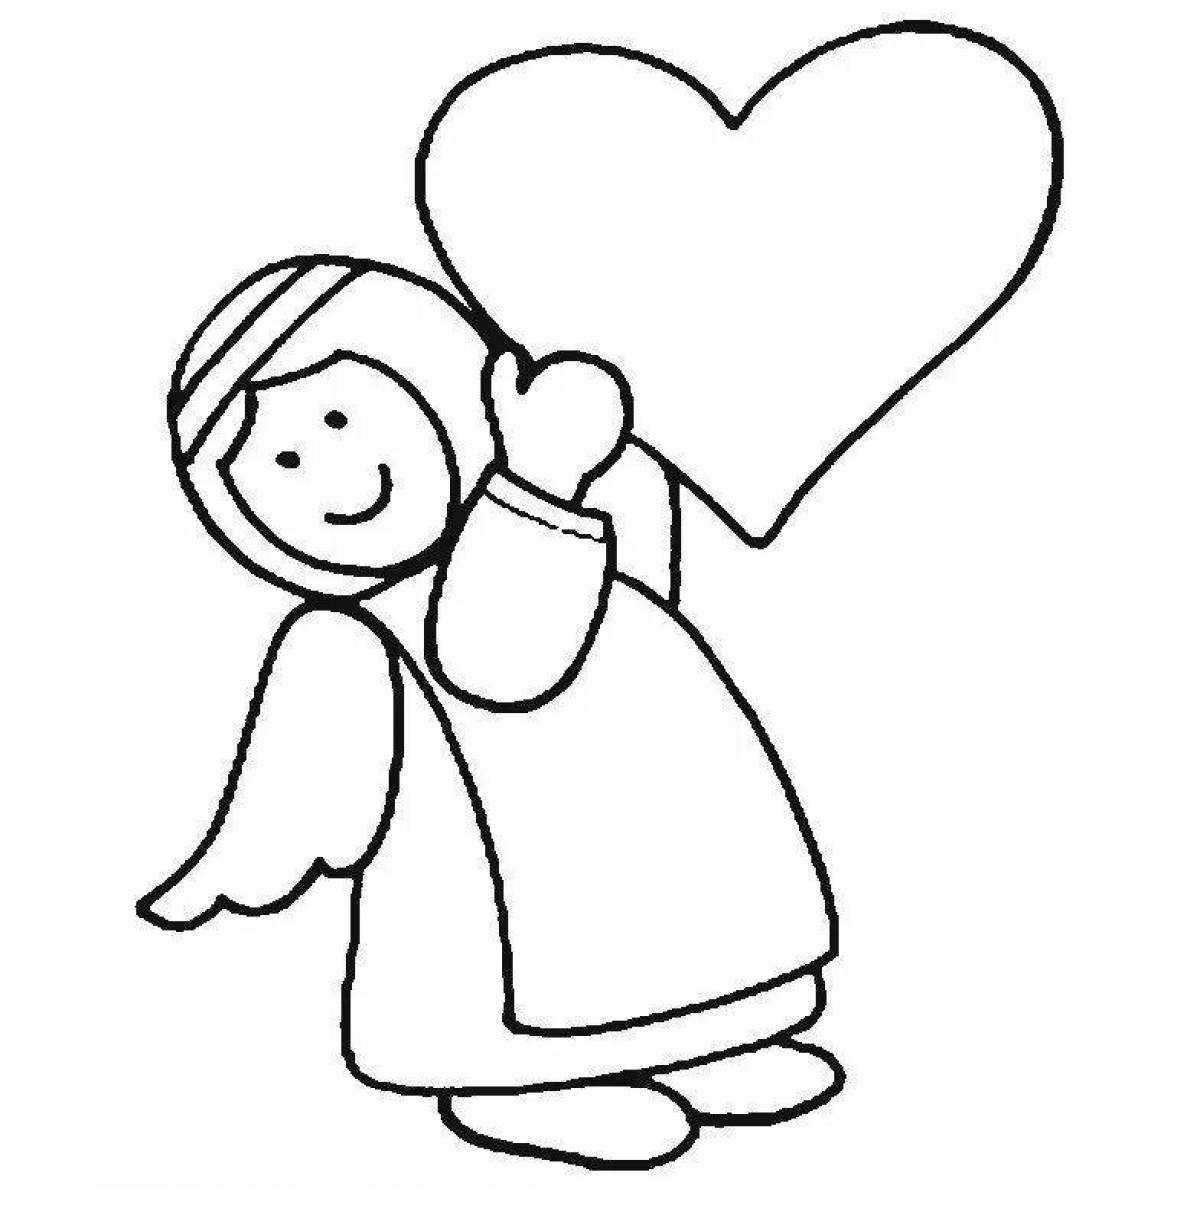 Christmas angel coloring page playful for kids